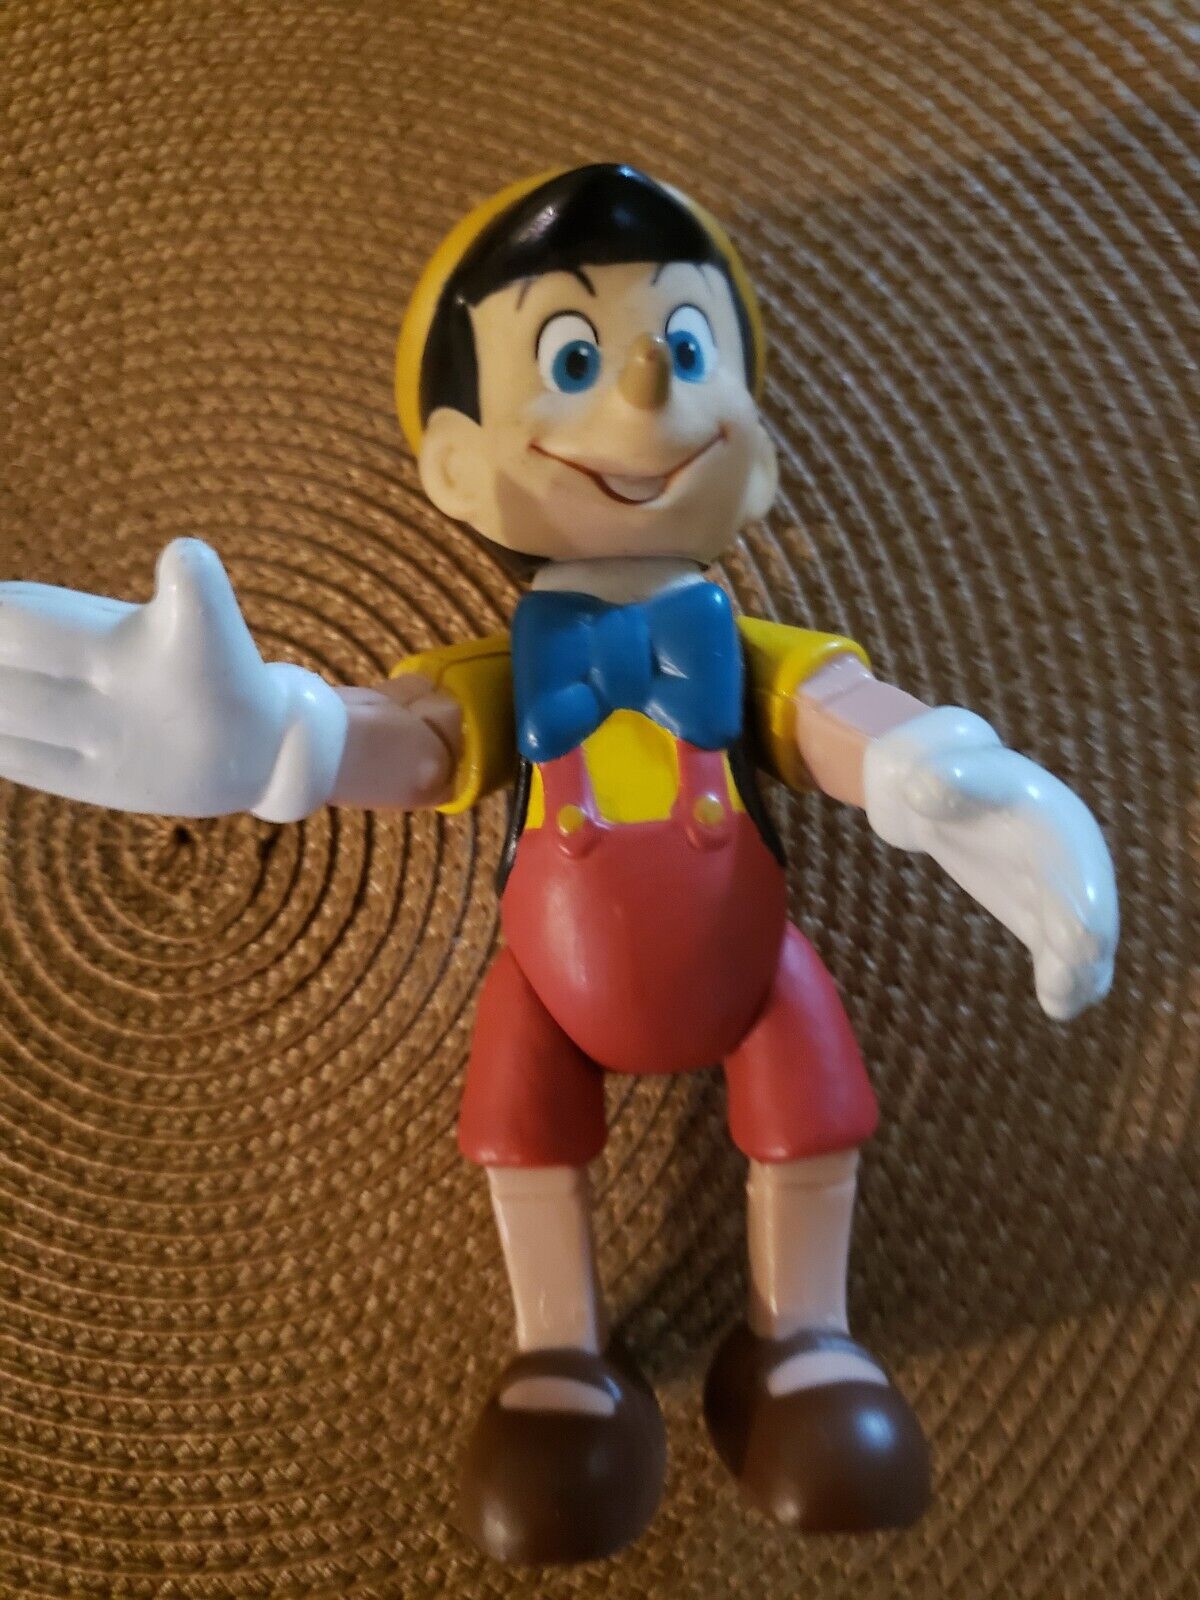 VINTAGE PINOCCHIO FIGURE  MOVABLE TOY WALT DISNEY COLLECTION 6 INCH